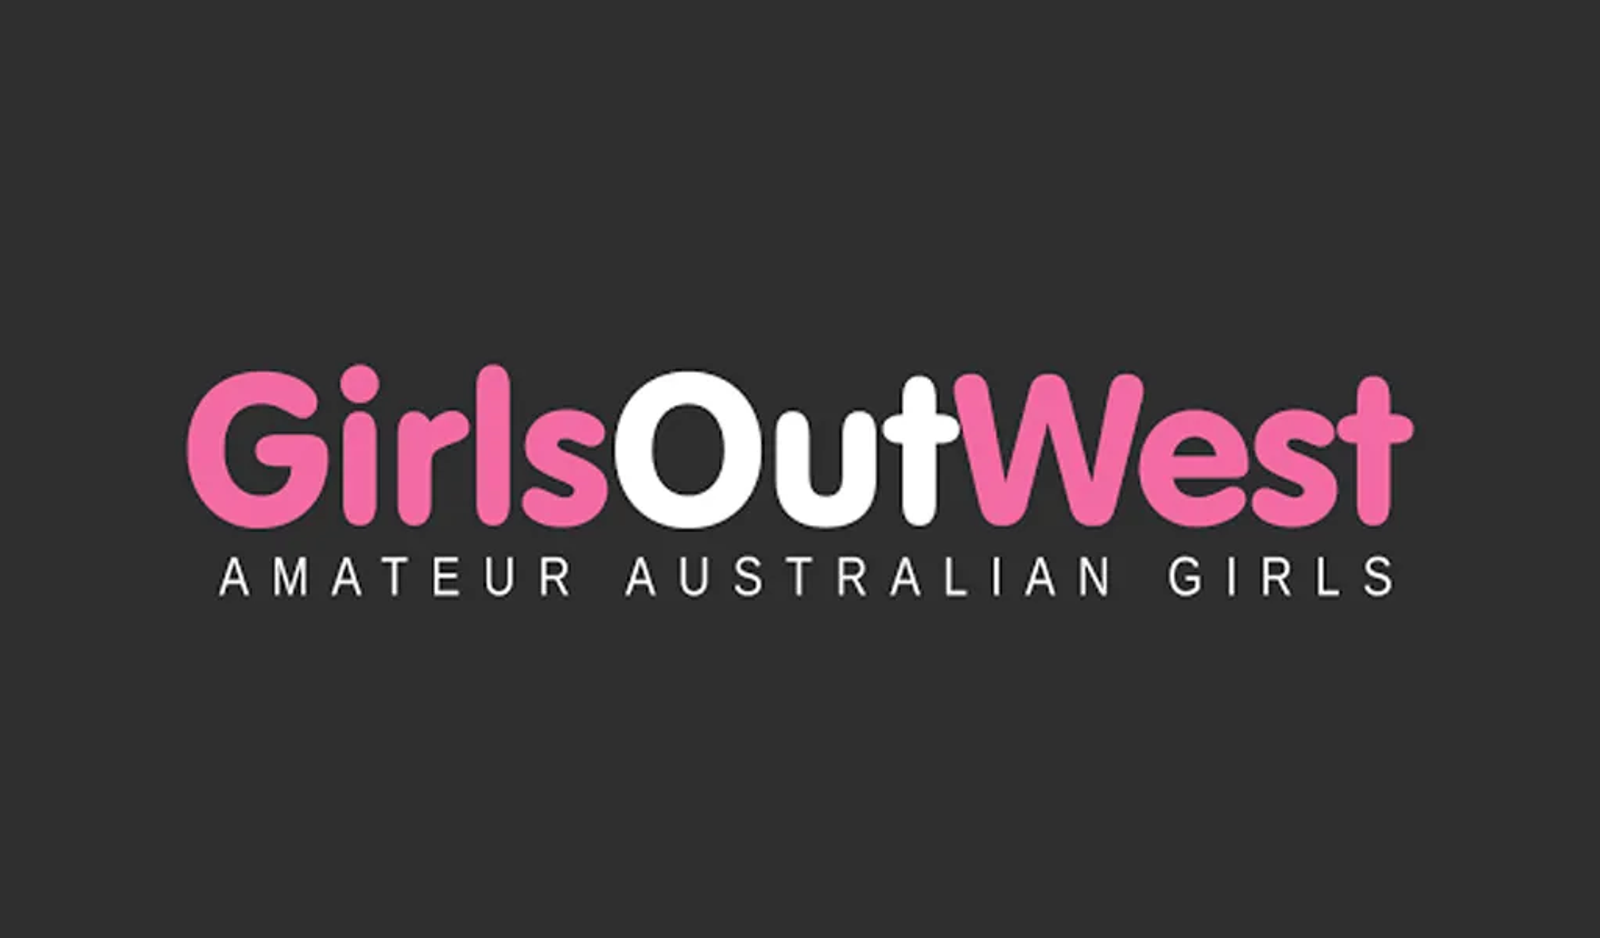 GirlsOutWest Receives Numerous Nominations for AAIAs